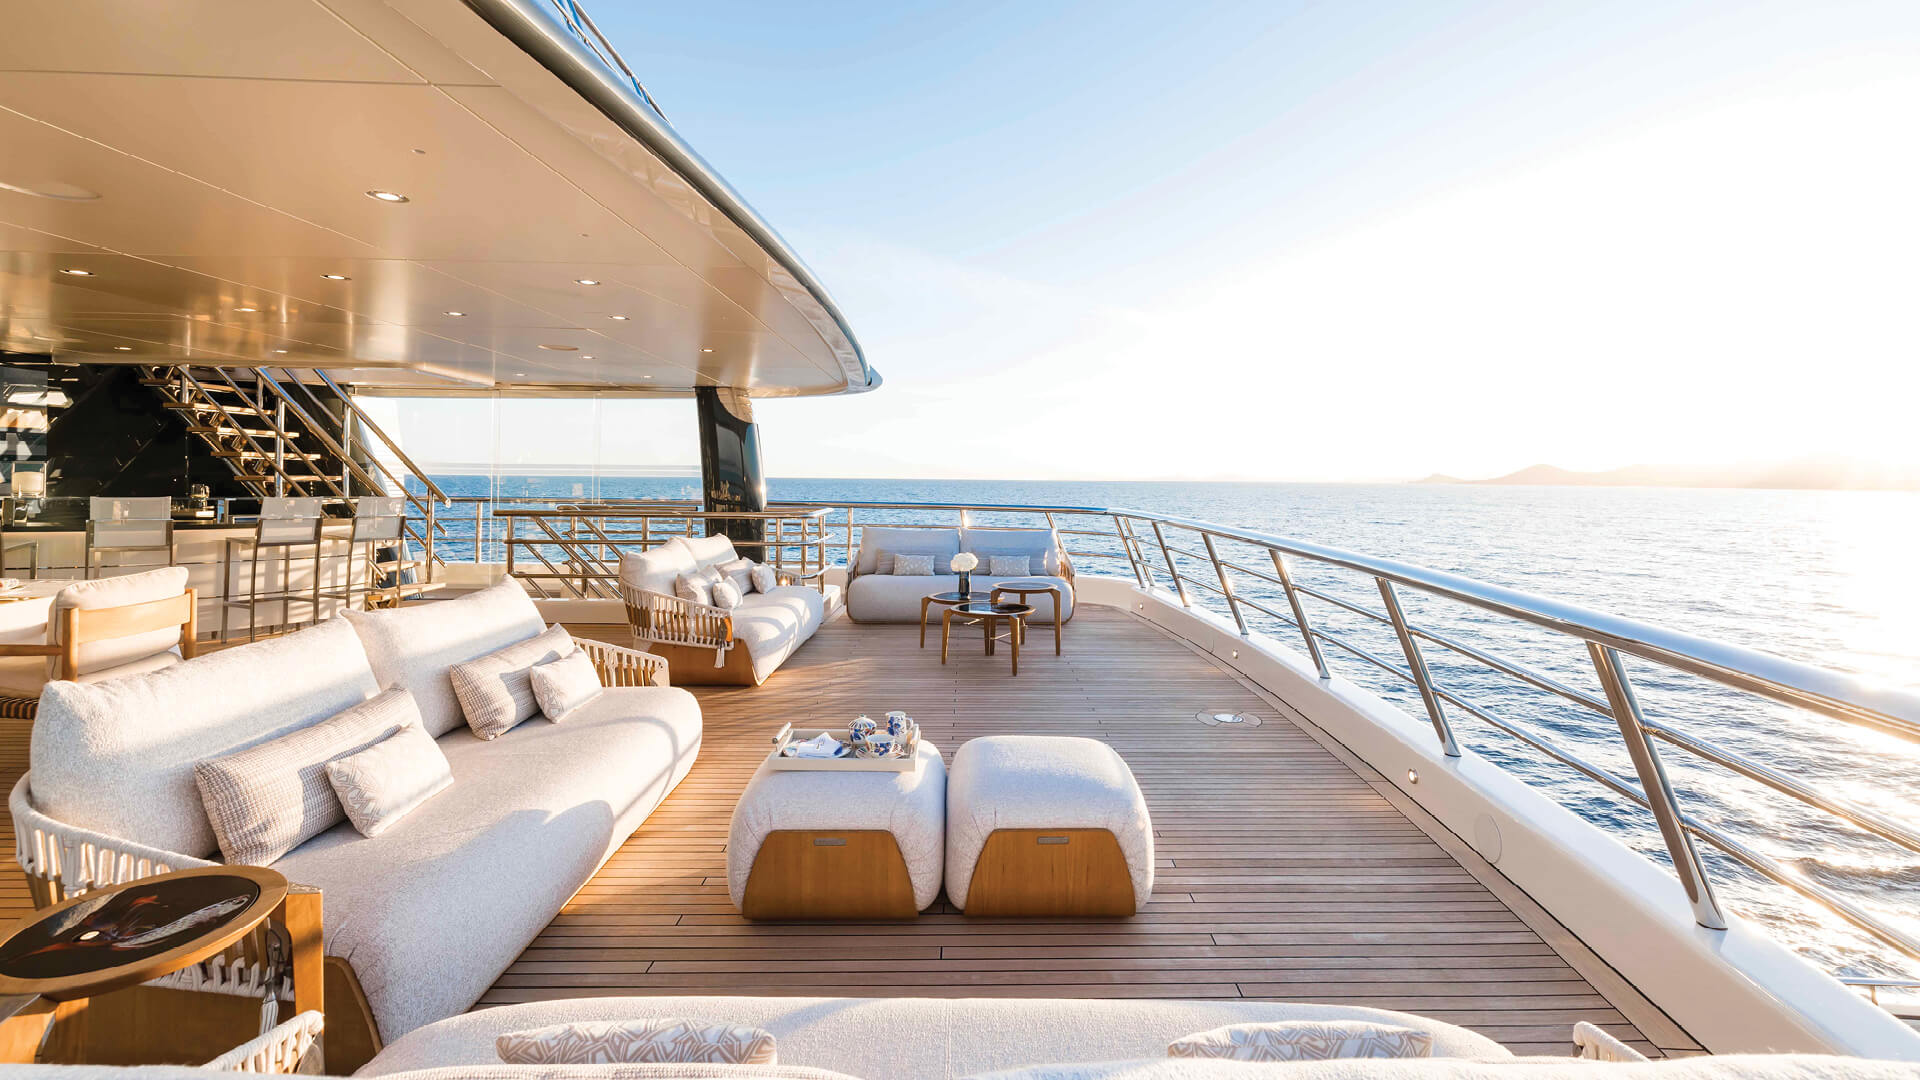 Visionnaire’s ‘Here Comes the Sun' captures the luxury of yachting with finesse